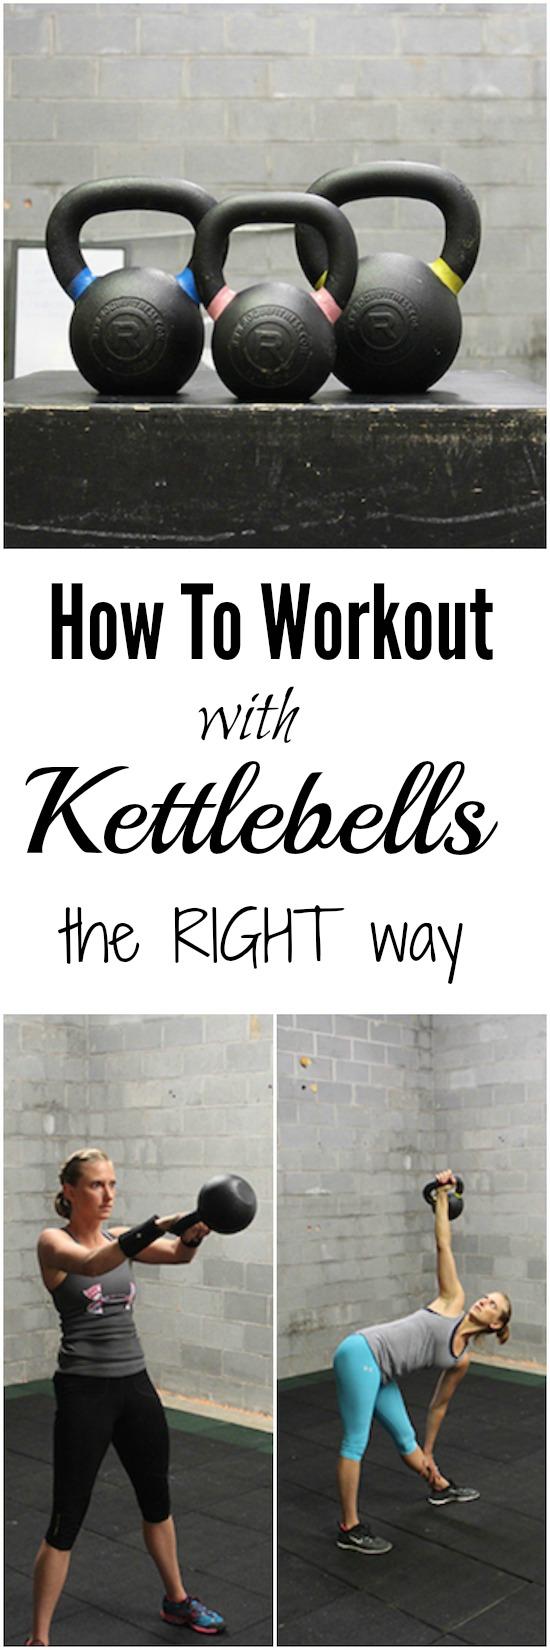 Want to learn how to workout with kettlebells? Make sure you do it right! Click here to learn the fundamentals!